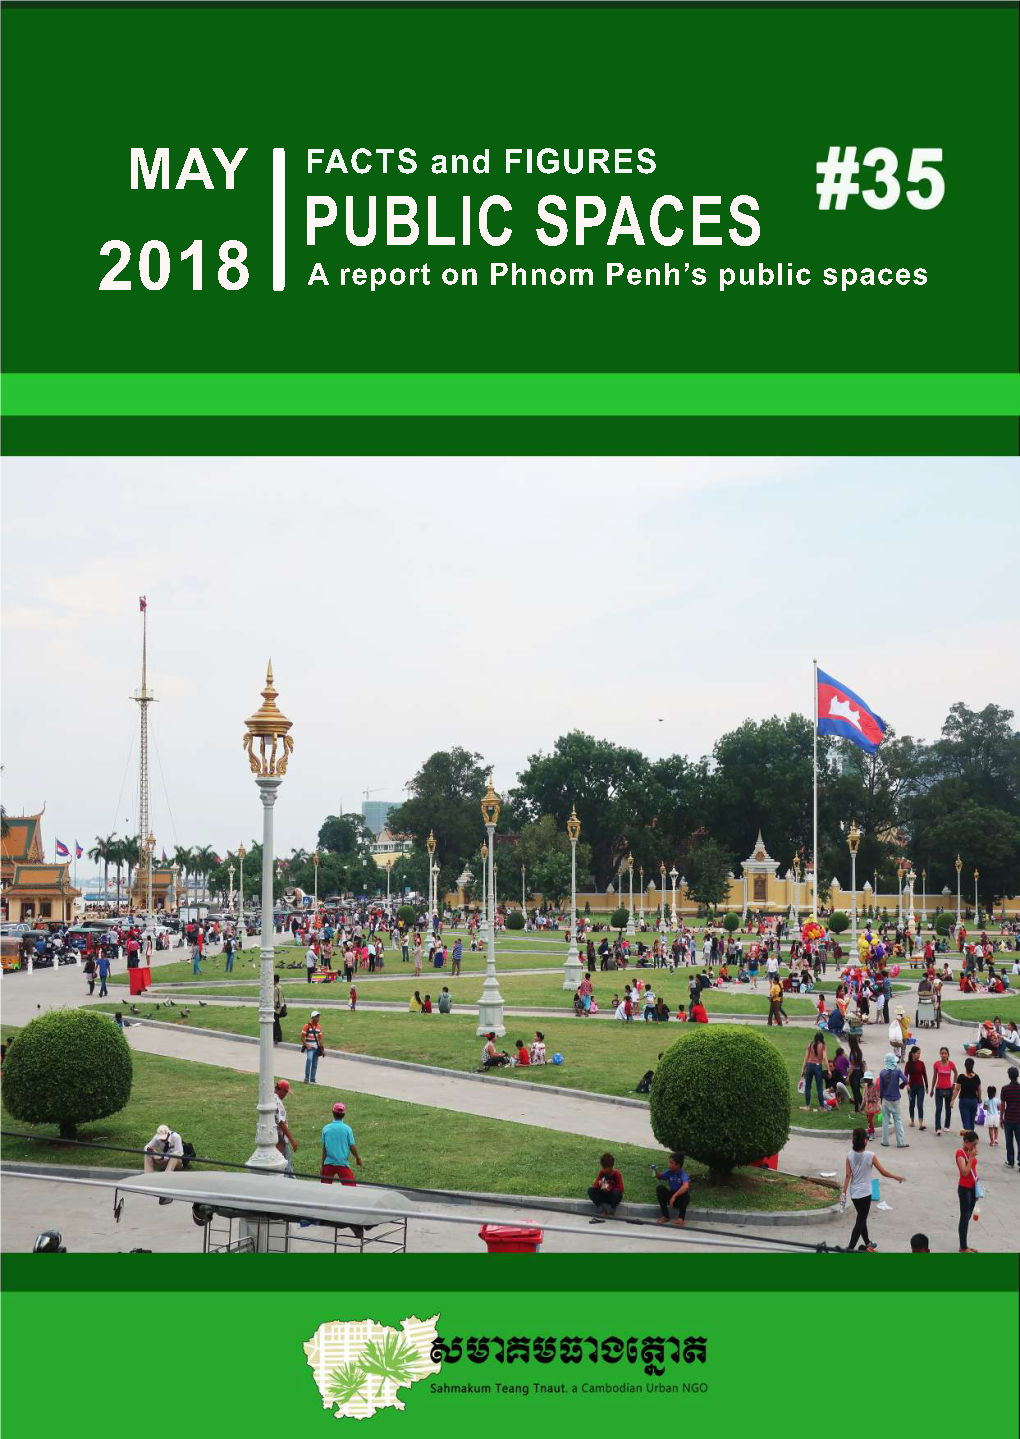 Public Spaces in Phnom Penh a Report on Public Spaces in the Capital